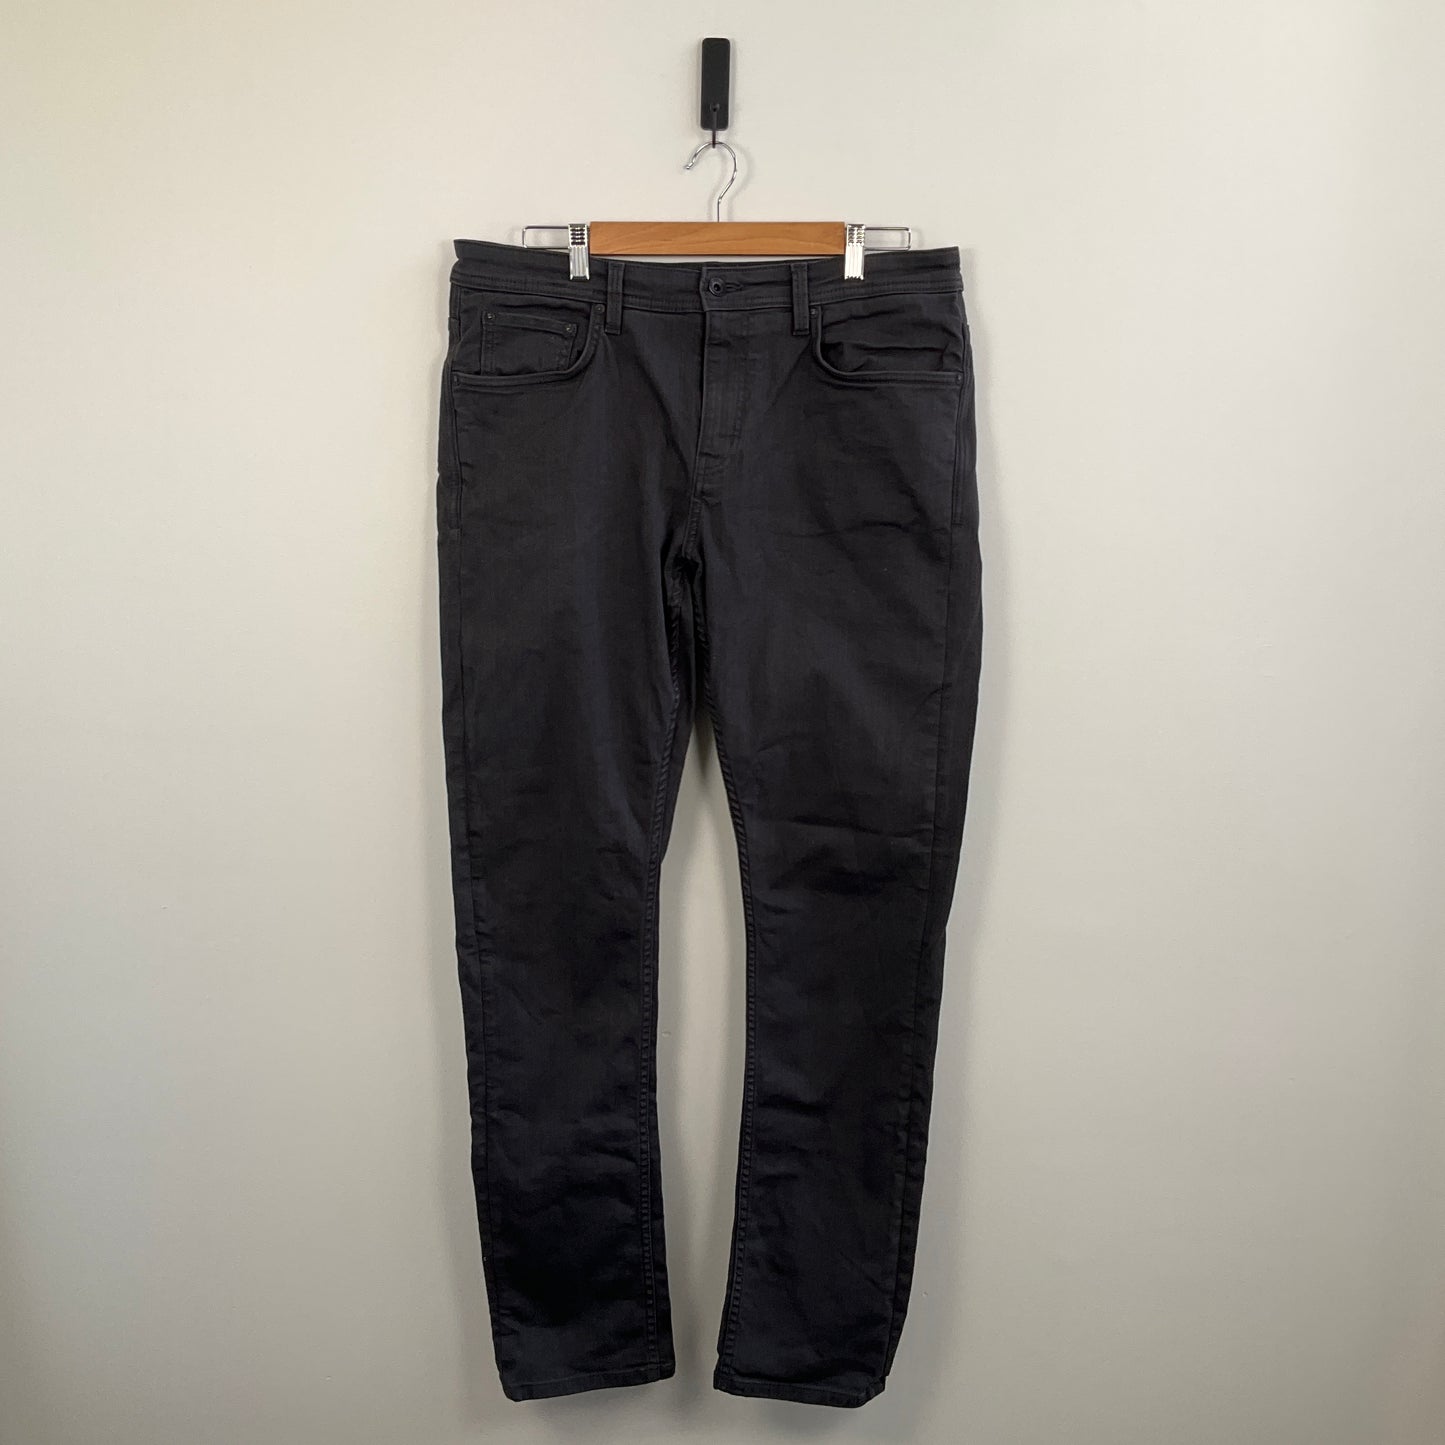 Country Road - Slim Jeans